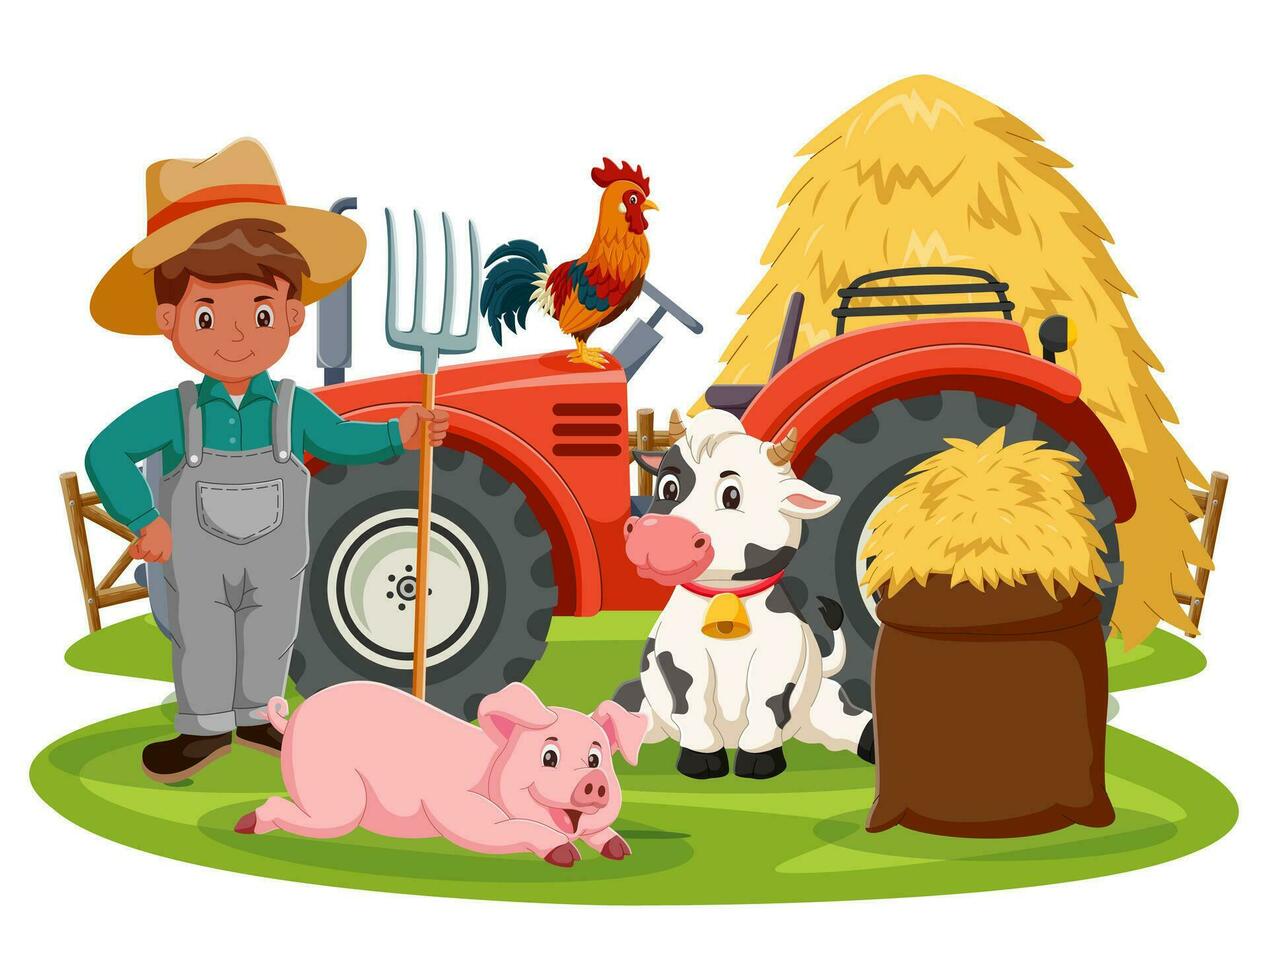 Funny Kid farmer with A Tractor and animals. Farm Scene With Cartoon Animals. Vector illustration